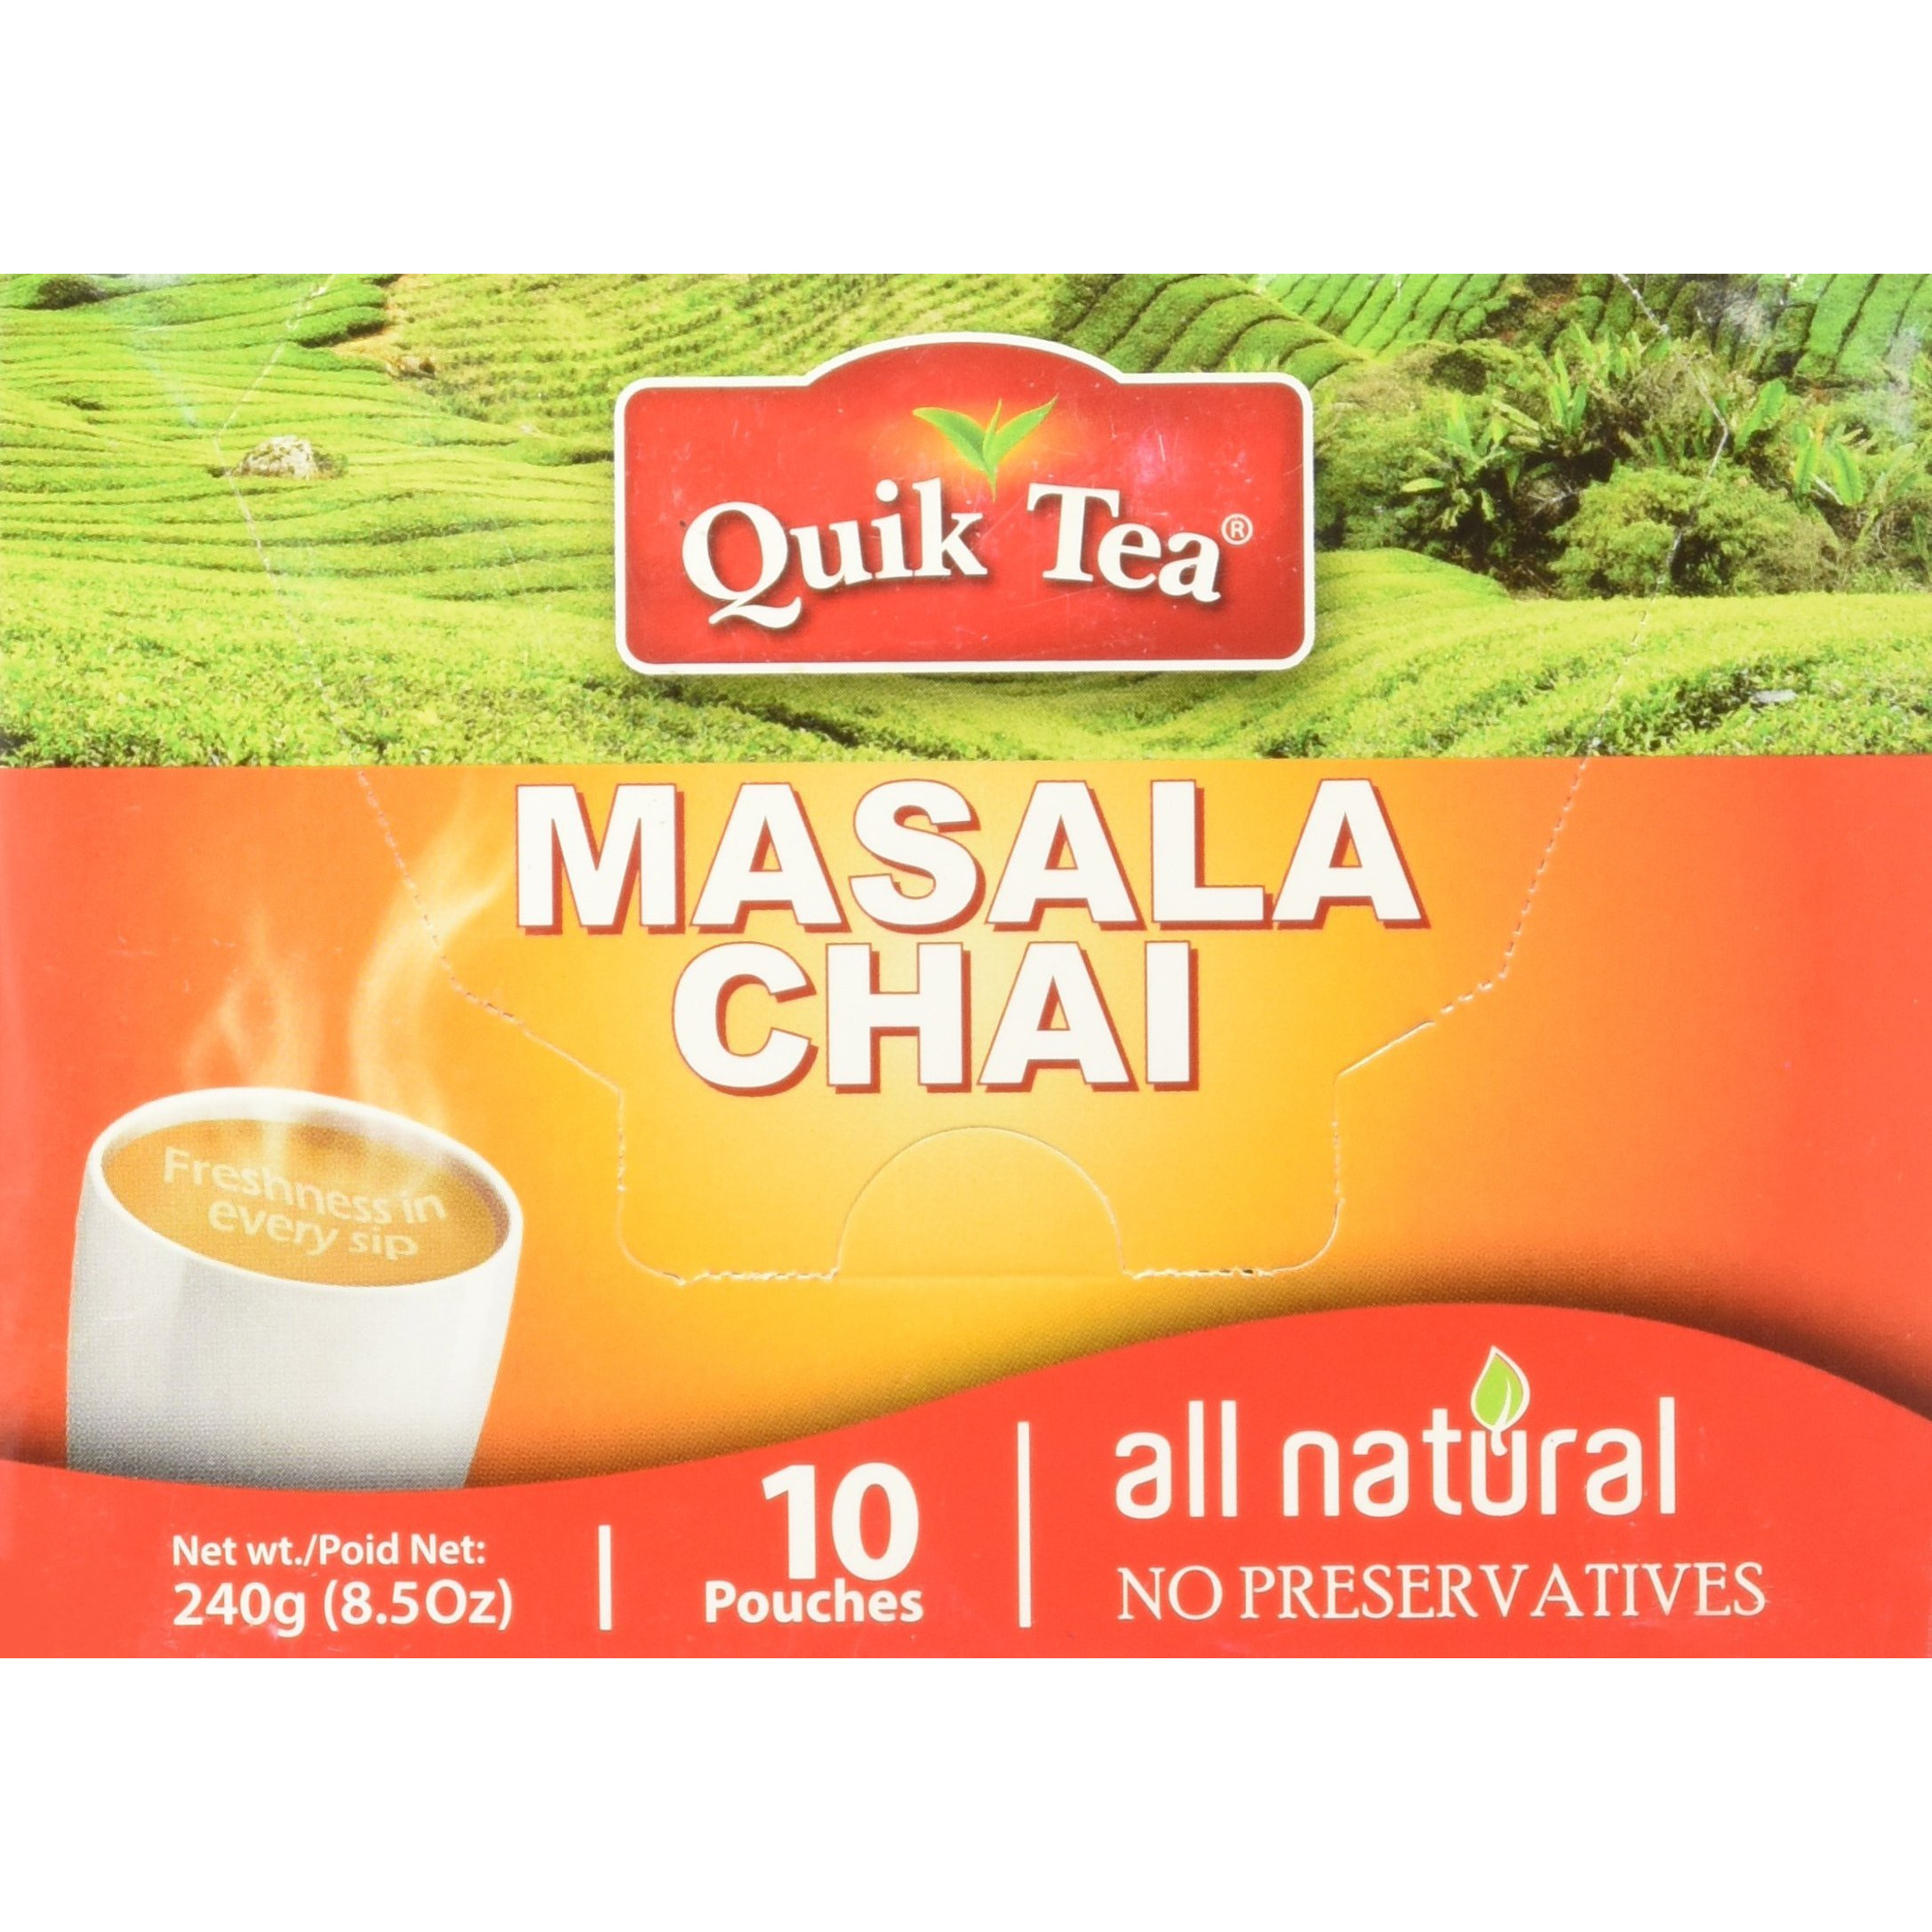 Quik Tea Masala Spiced Chai - 10 Pouches (Pack of 3 for a Total of 30 Pouches)